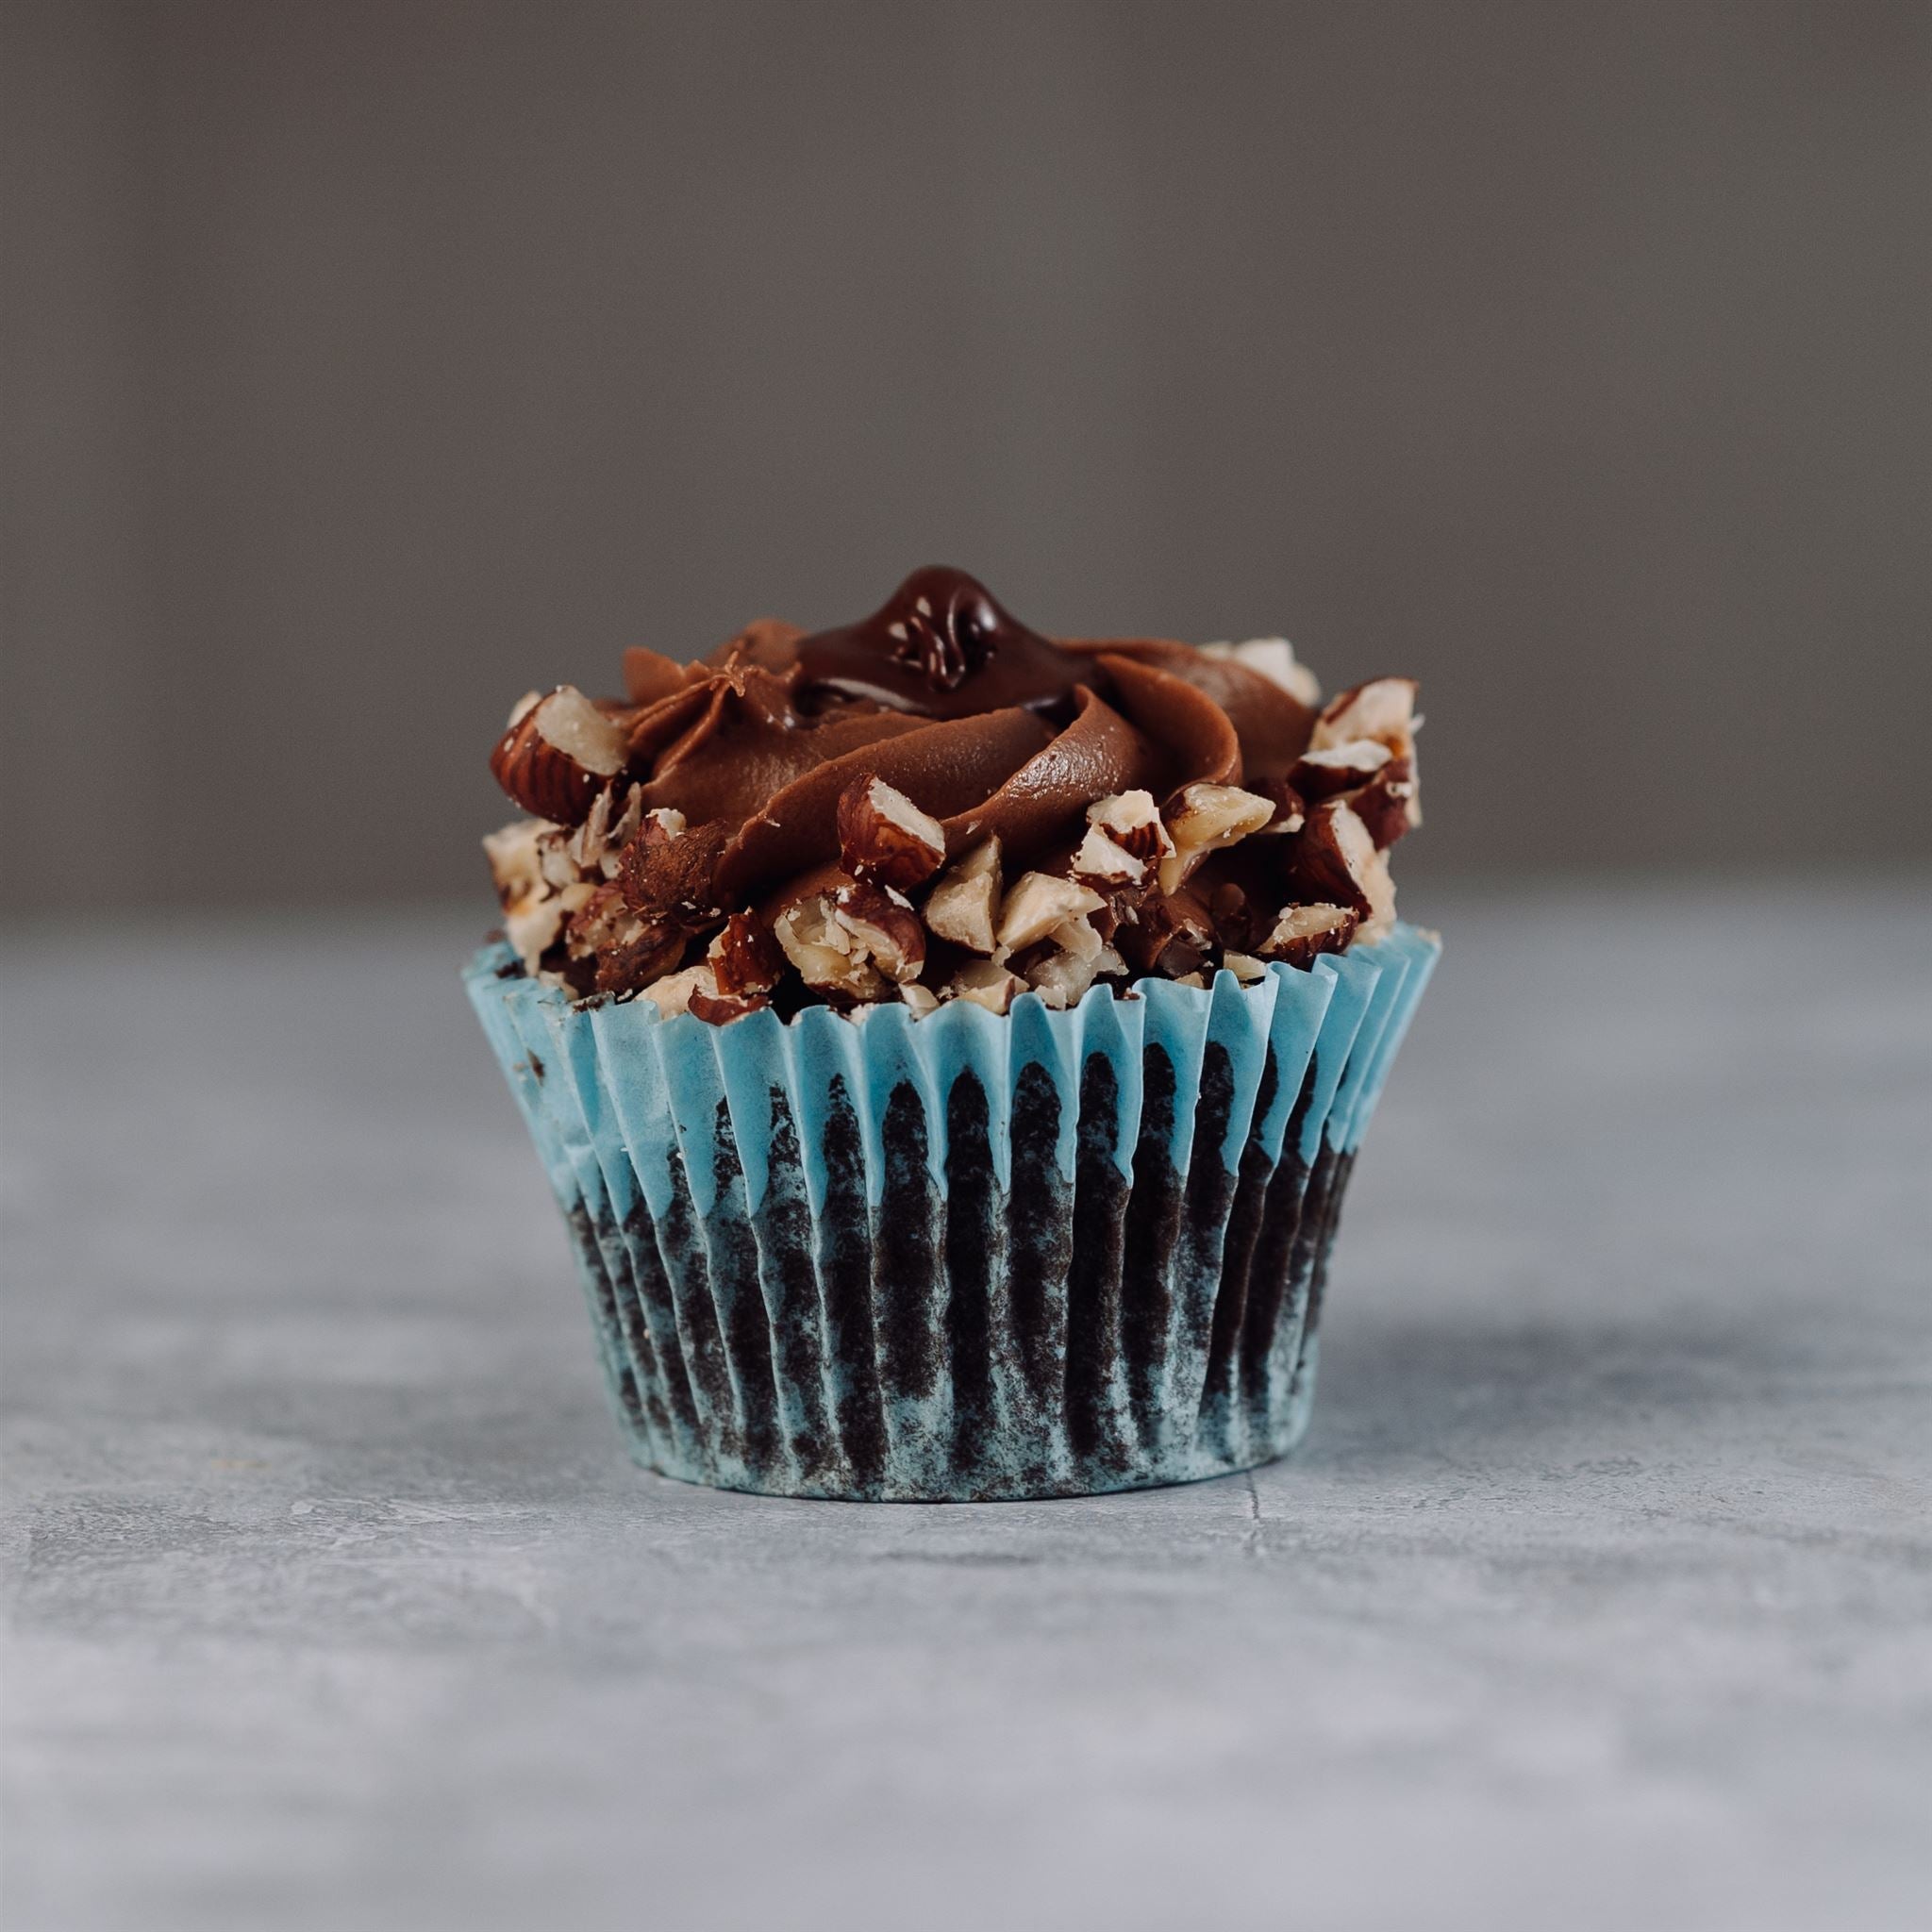 Free from Gluten Nutella Cupcakes - Jack and Beyond